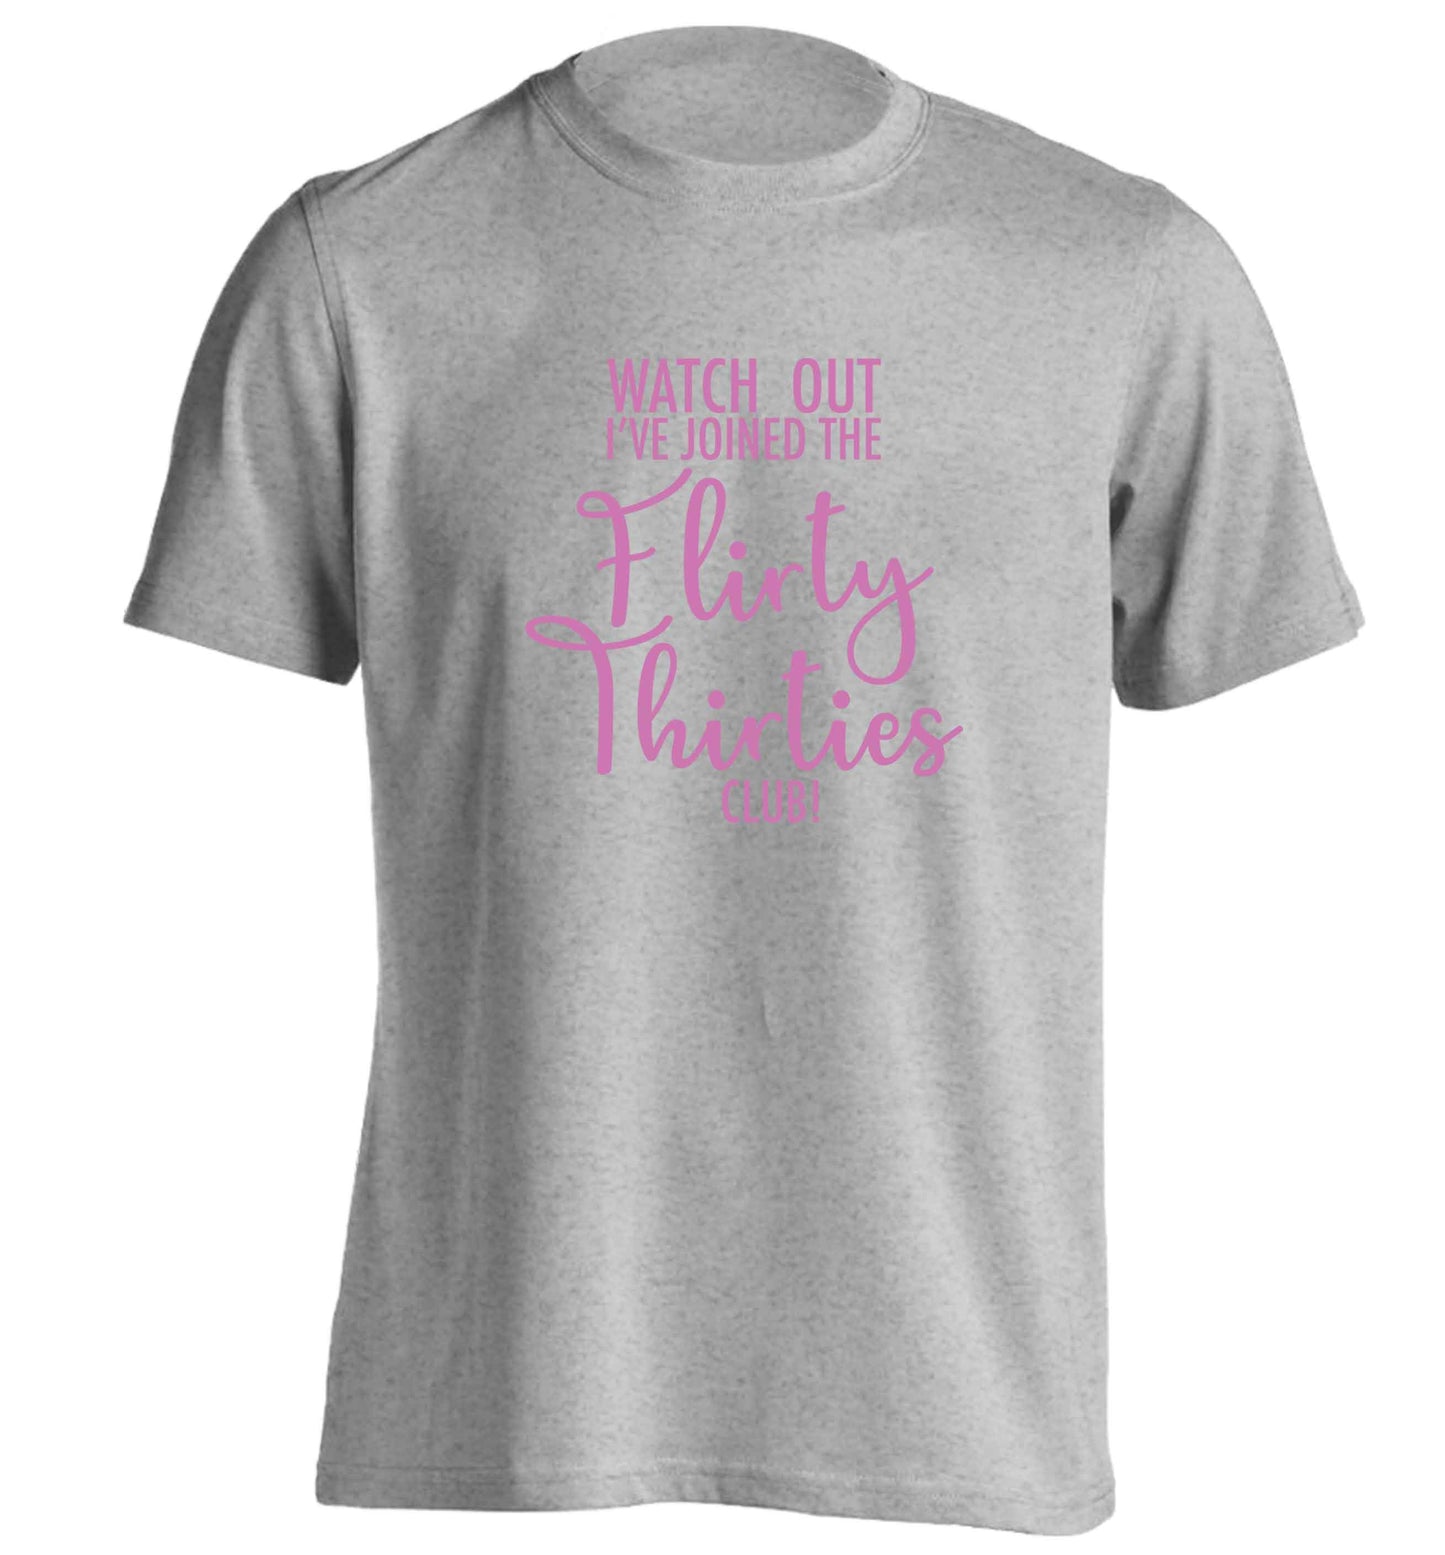 Watch out I've joined the flirty thirties club adults unisex grey Tshirt 2XL